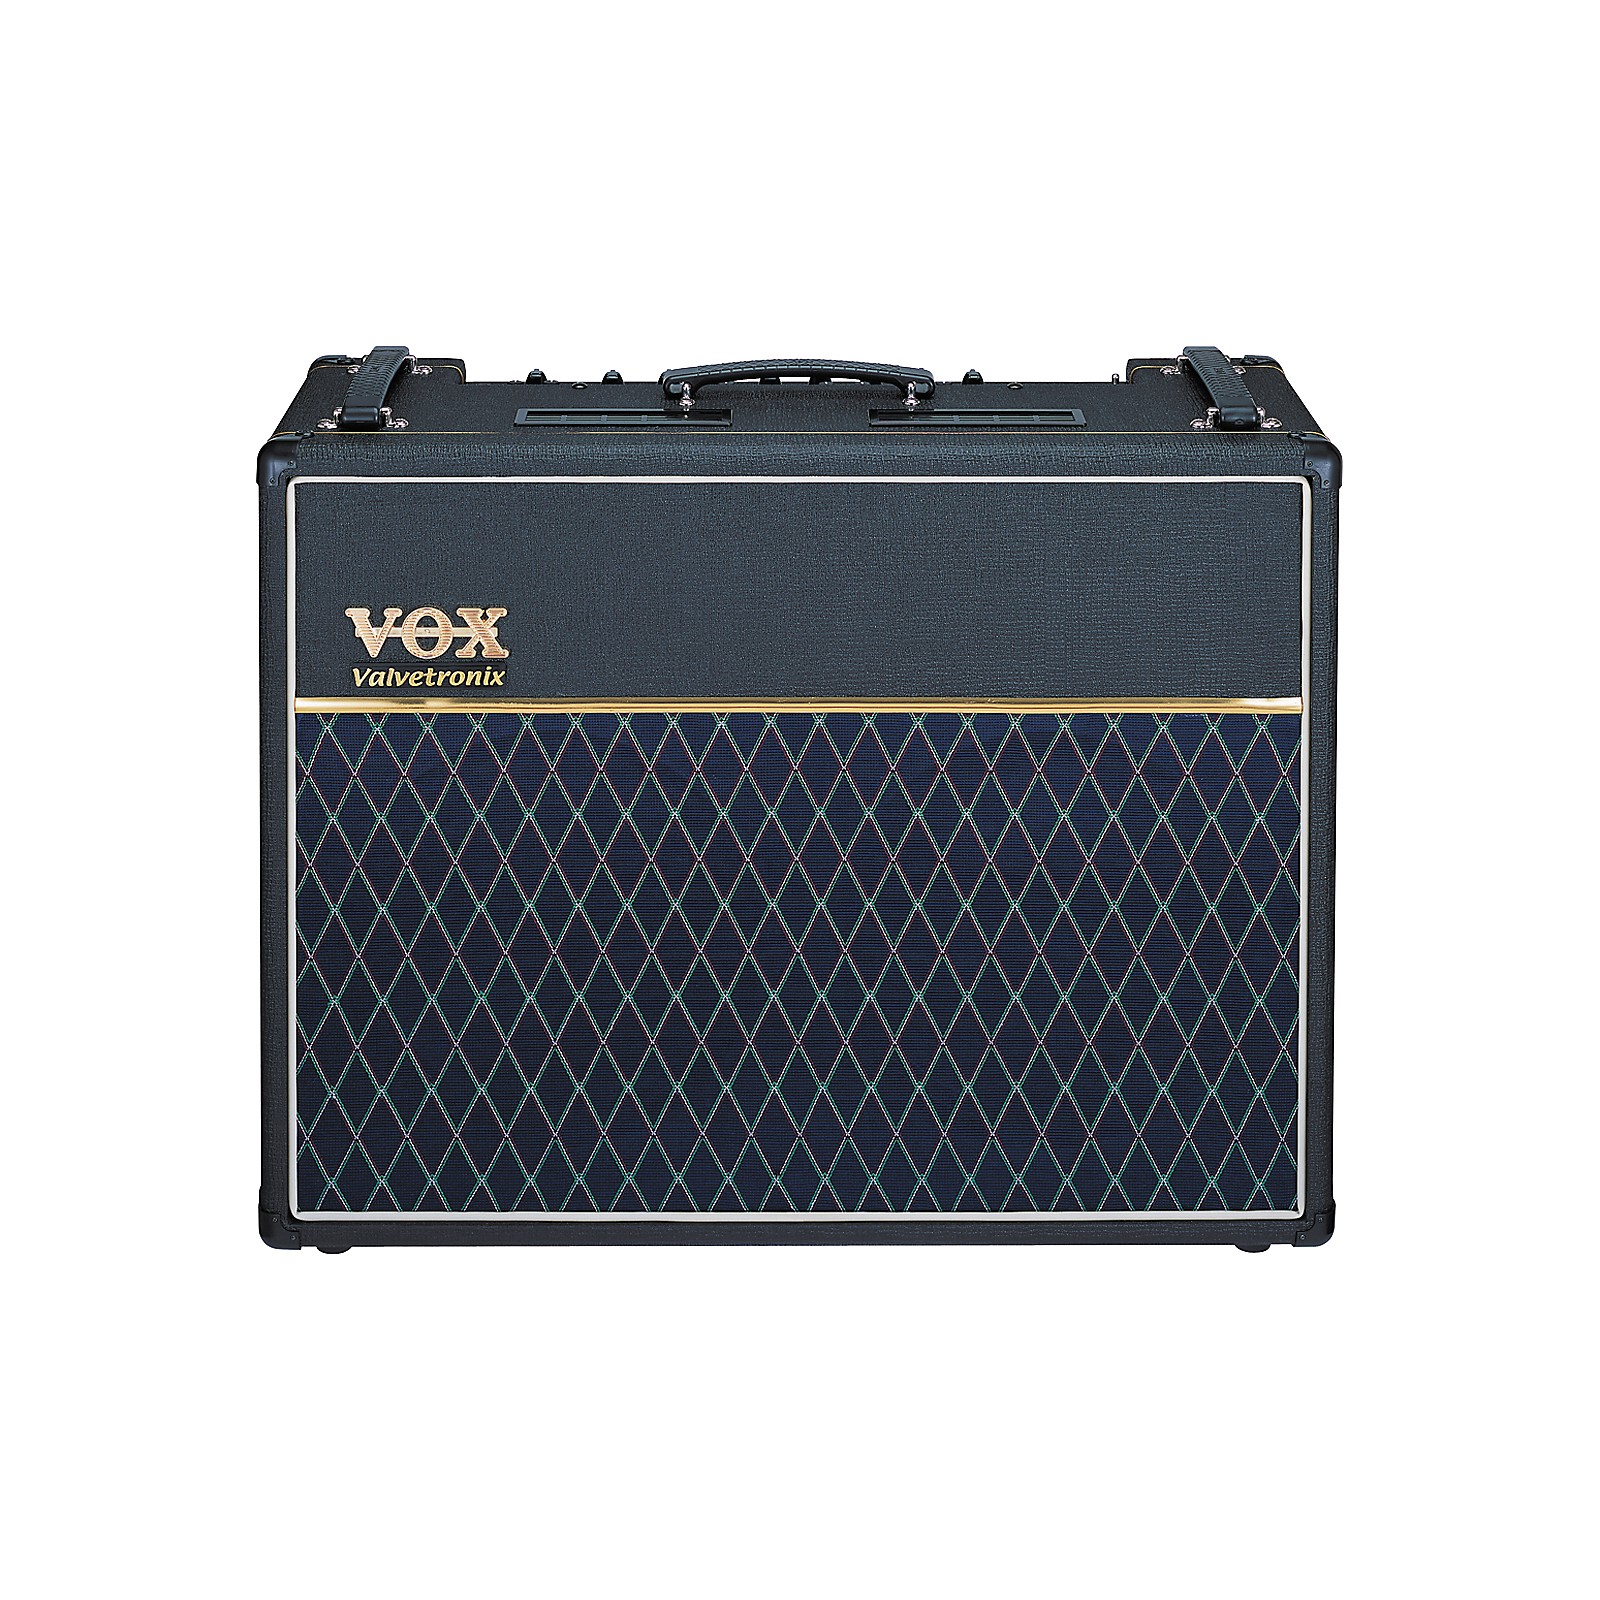 vox amps combo